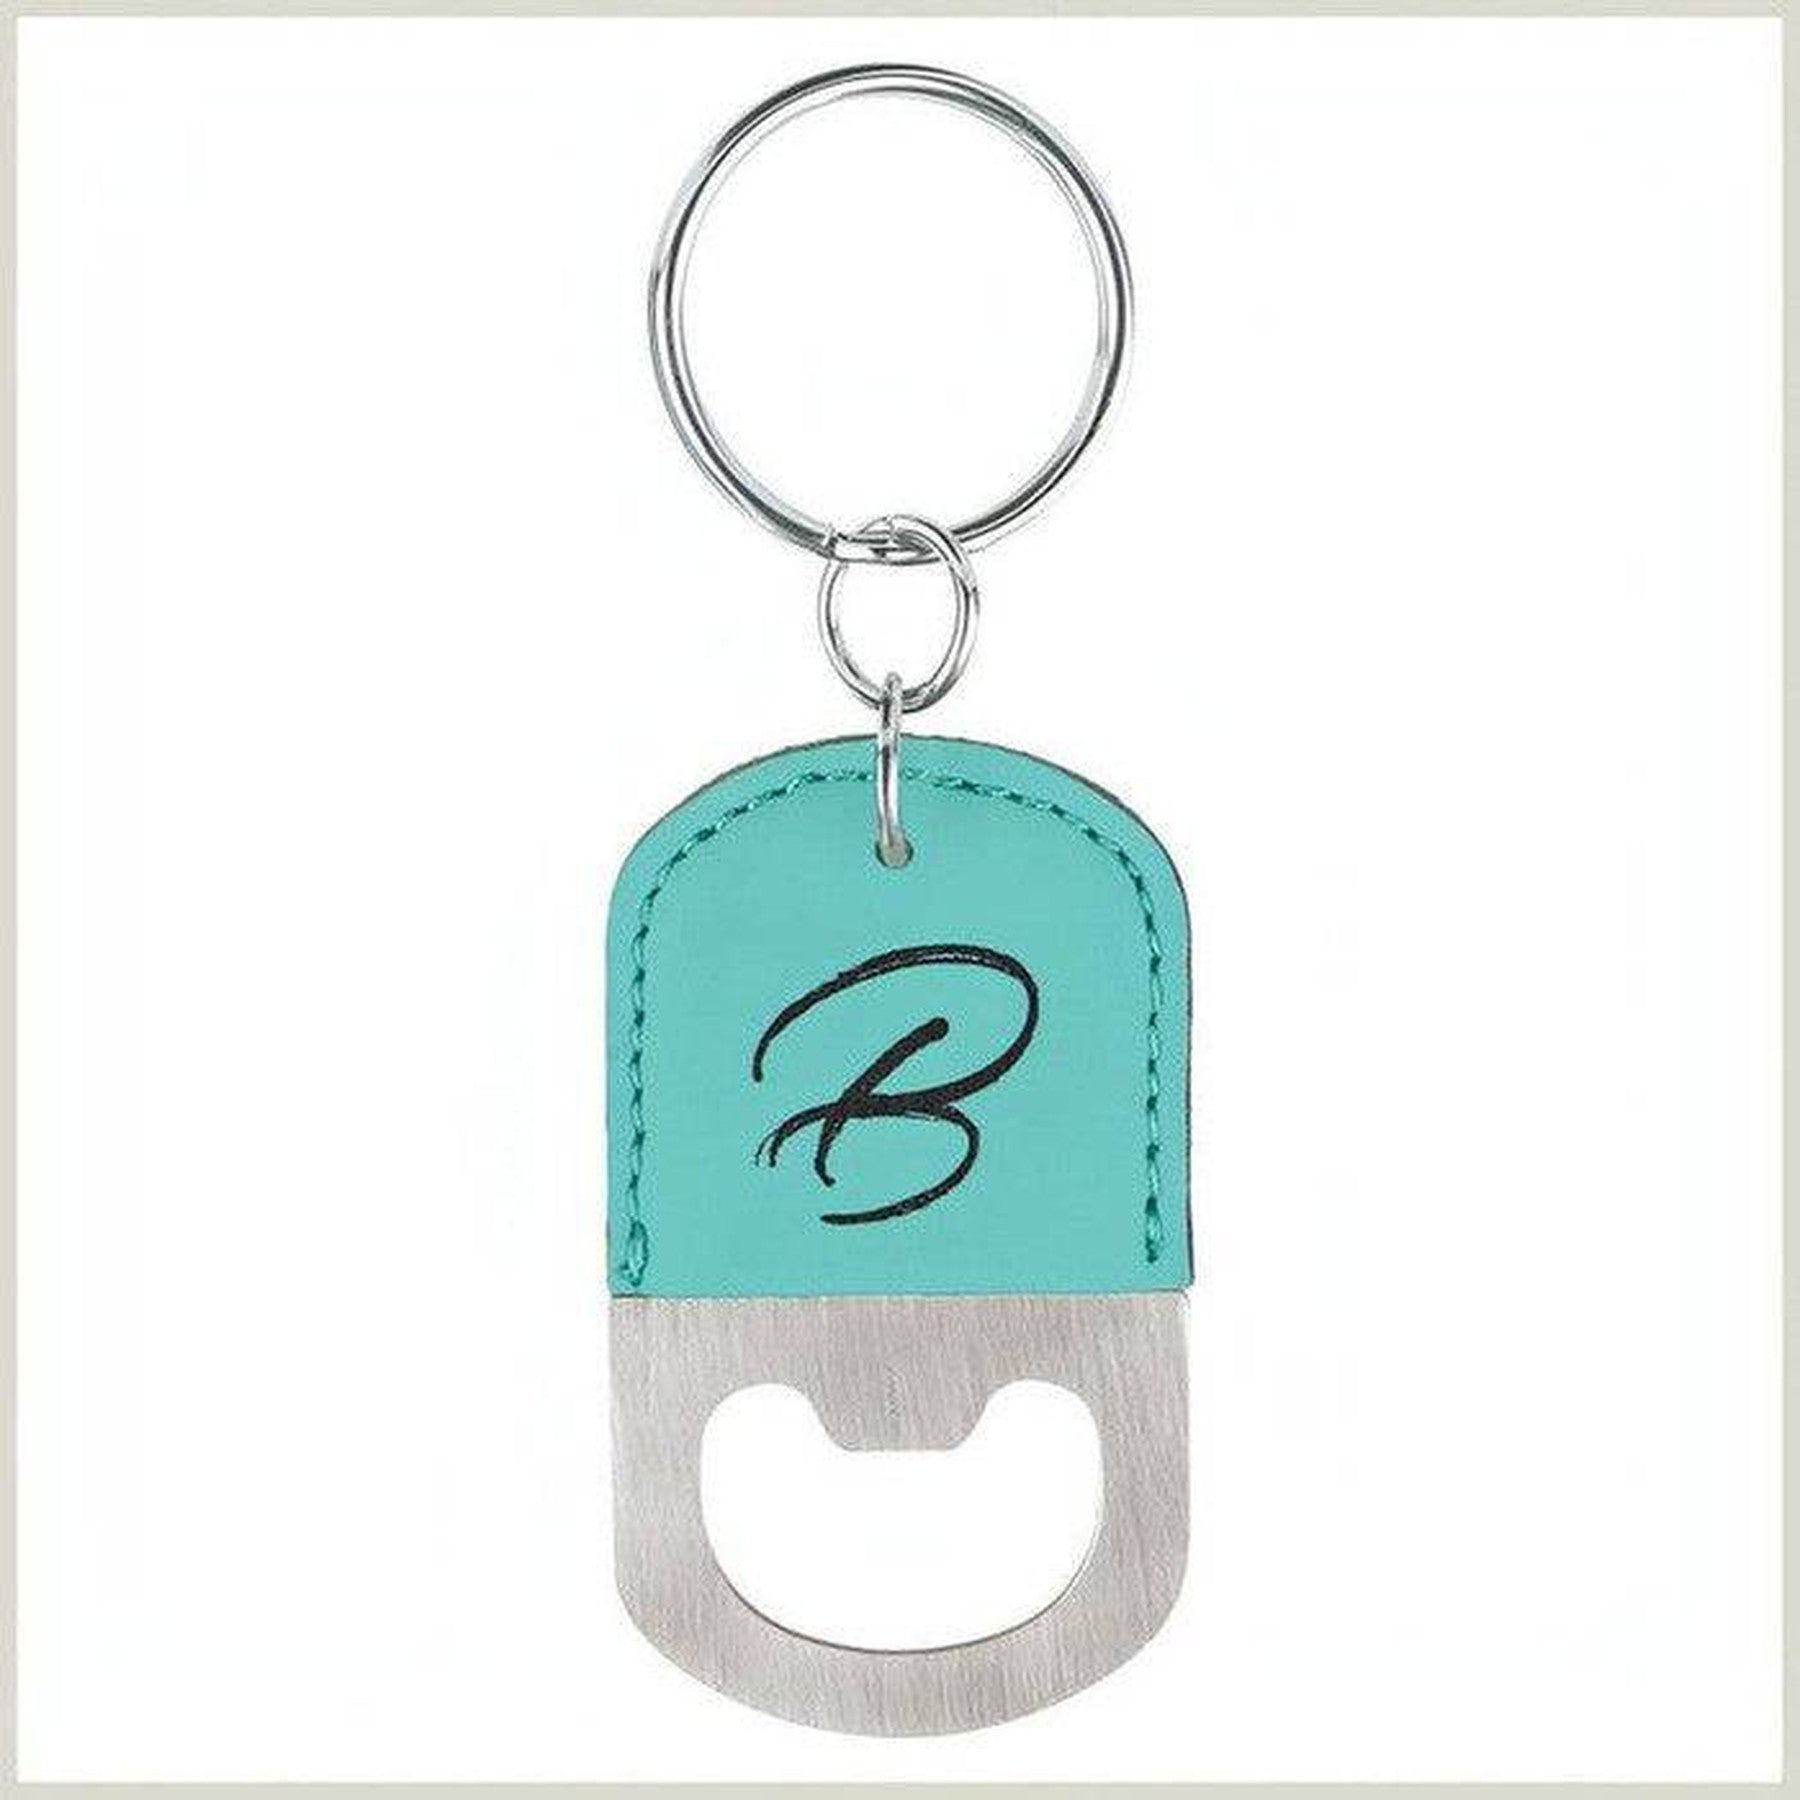 Leatherette Oval Bottle Opener with Keychain